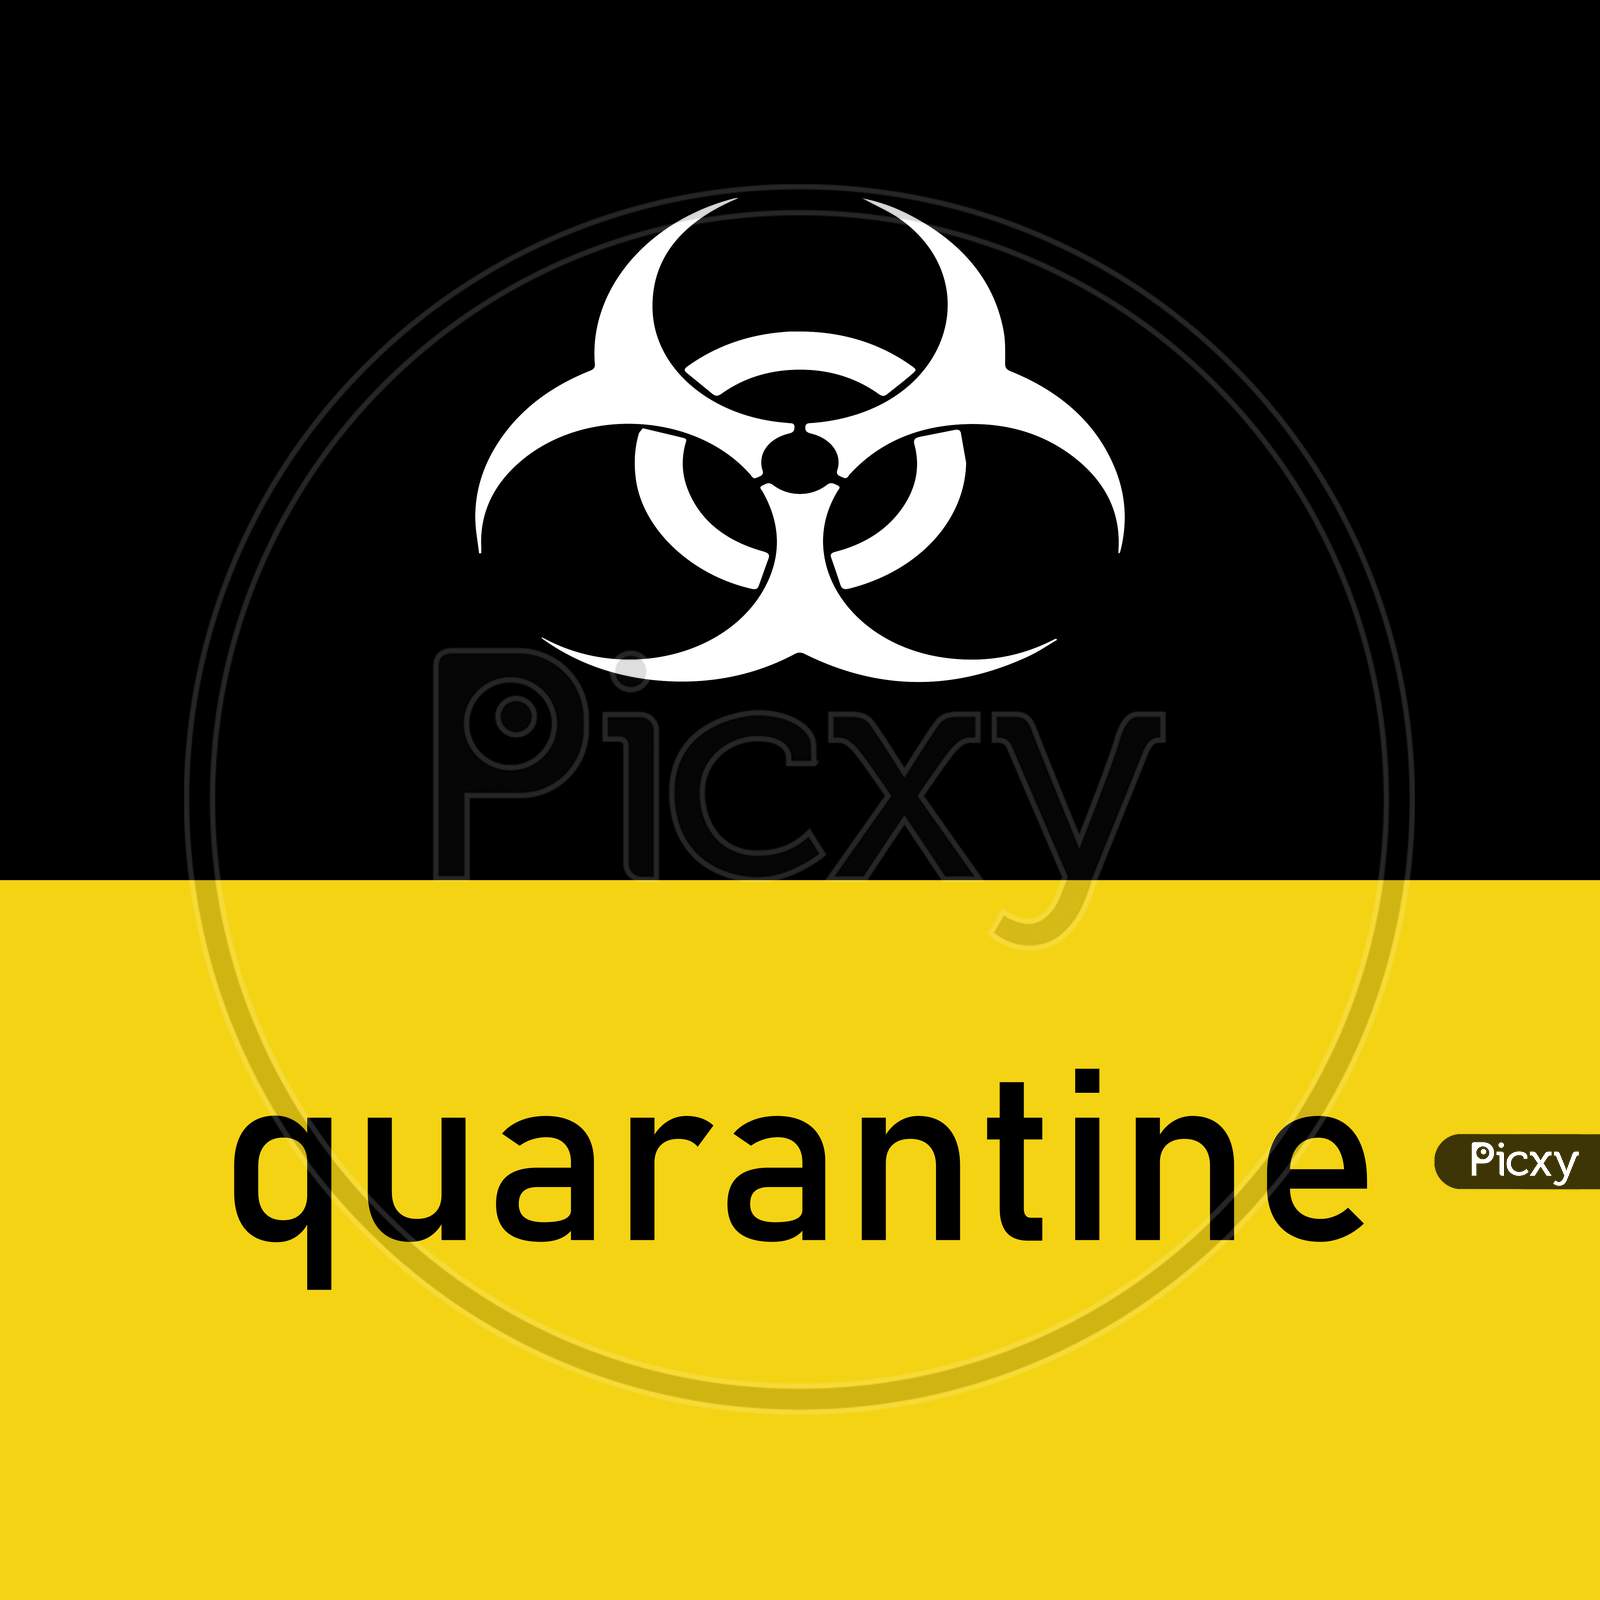 Bioazard Warning Quarantine Poster. Vector Template For Posters, Banners, Advertising.